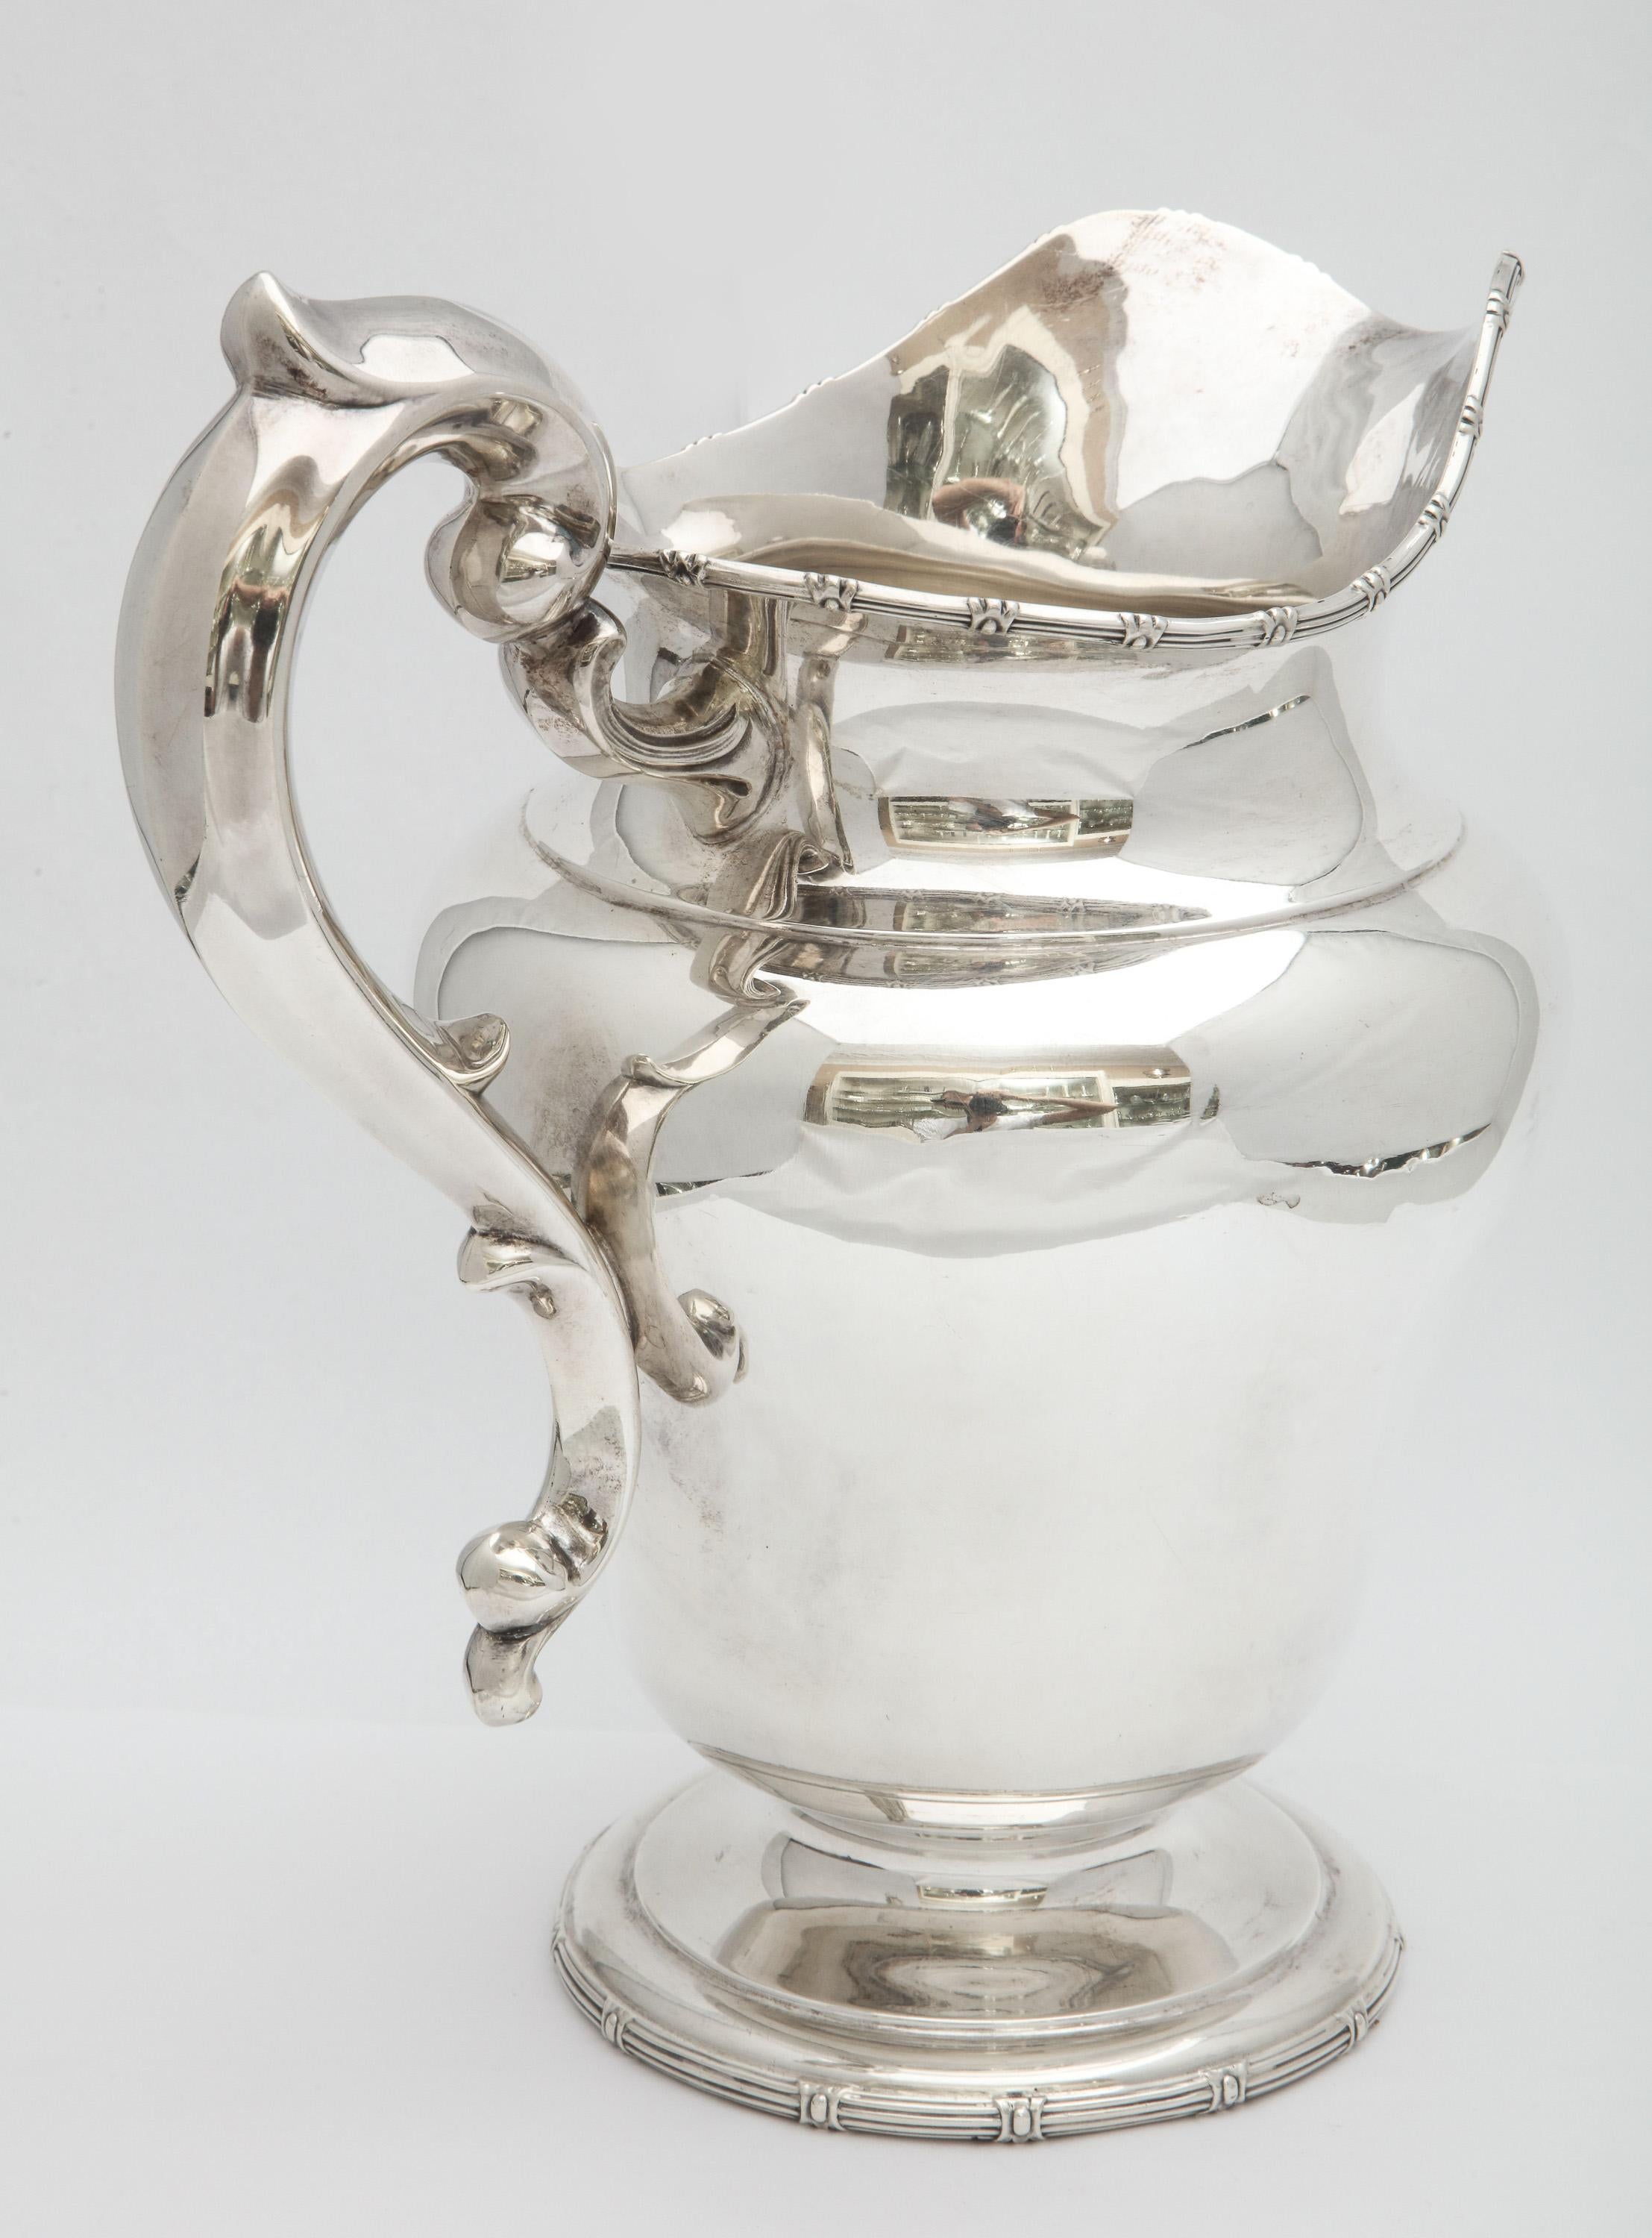 Neoclassical-style, sterling silver water pitcher, Frank Smith Silver Co., Gardner, Mass., circa 1905. Measures 10 1/4 inches high (at highest point) x 9 1/2 inches wide (from handle to handle x 7 inches diameter (at widest point). Lovely border on